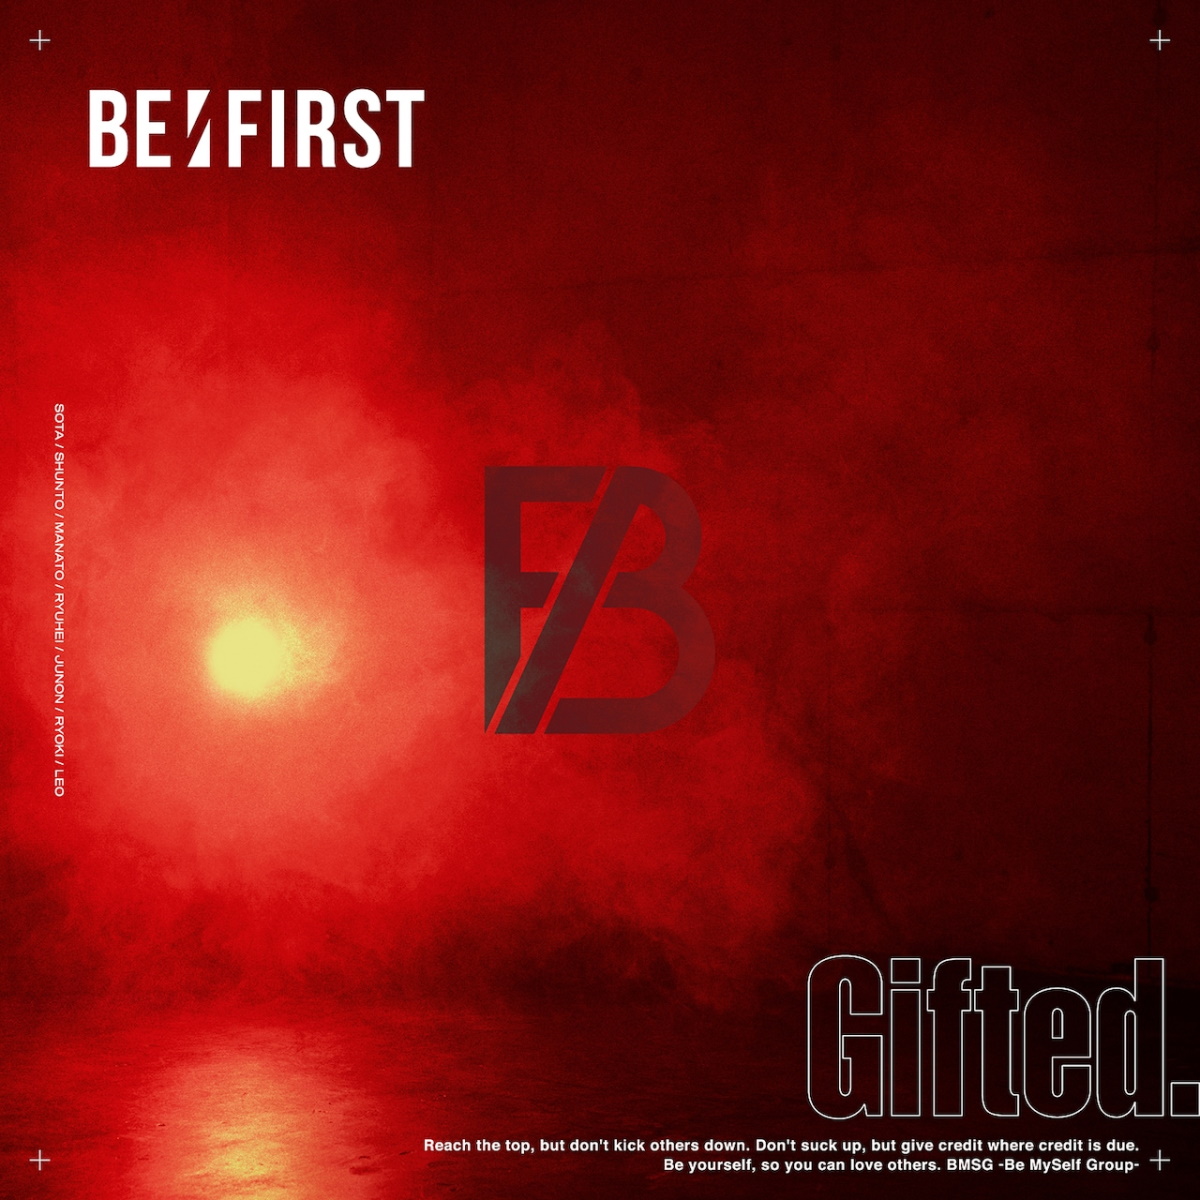 『BE:FIRST - First Step』収録の『Gifted.』ジャケット